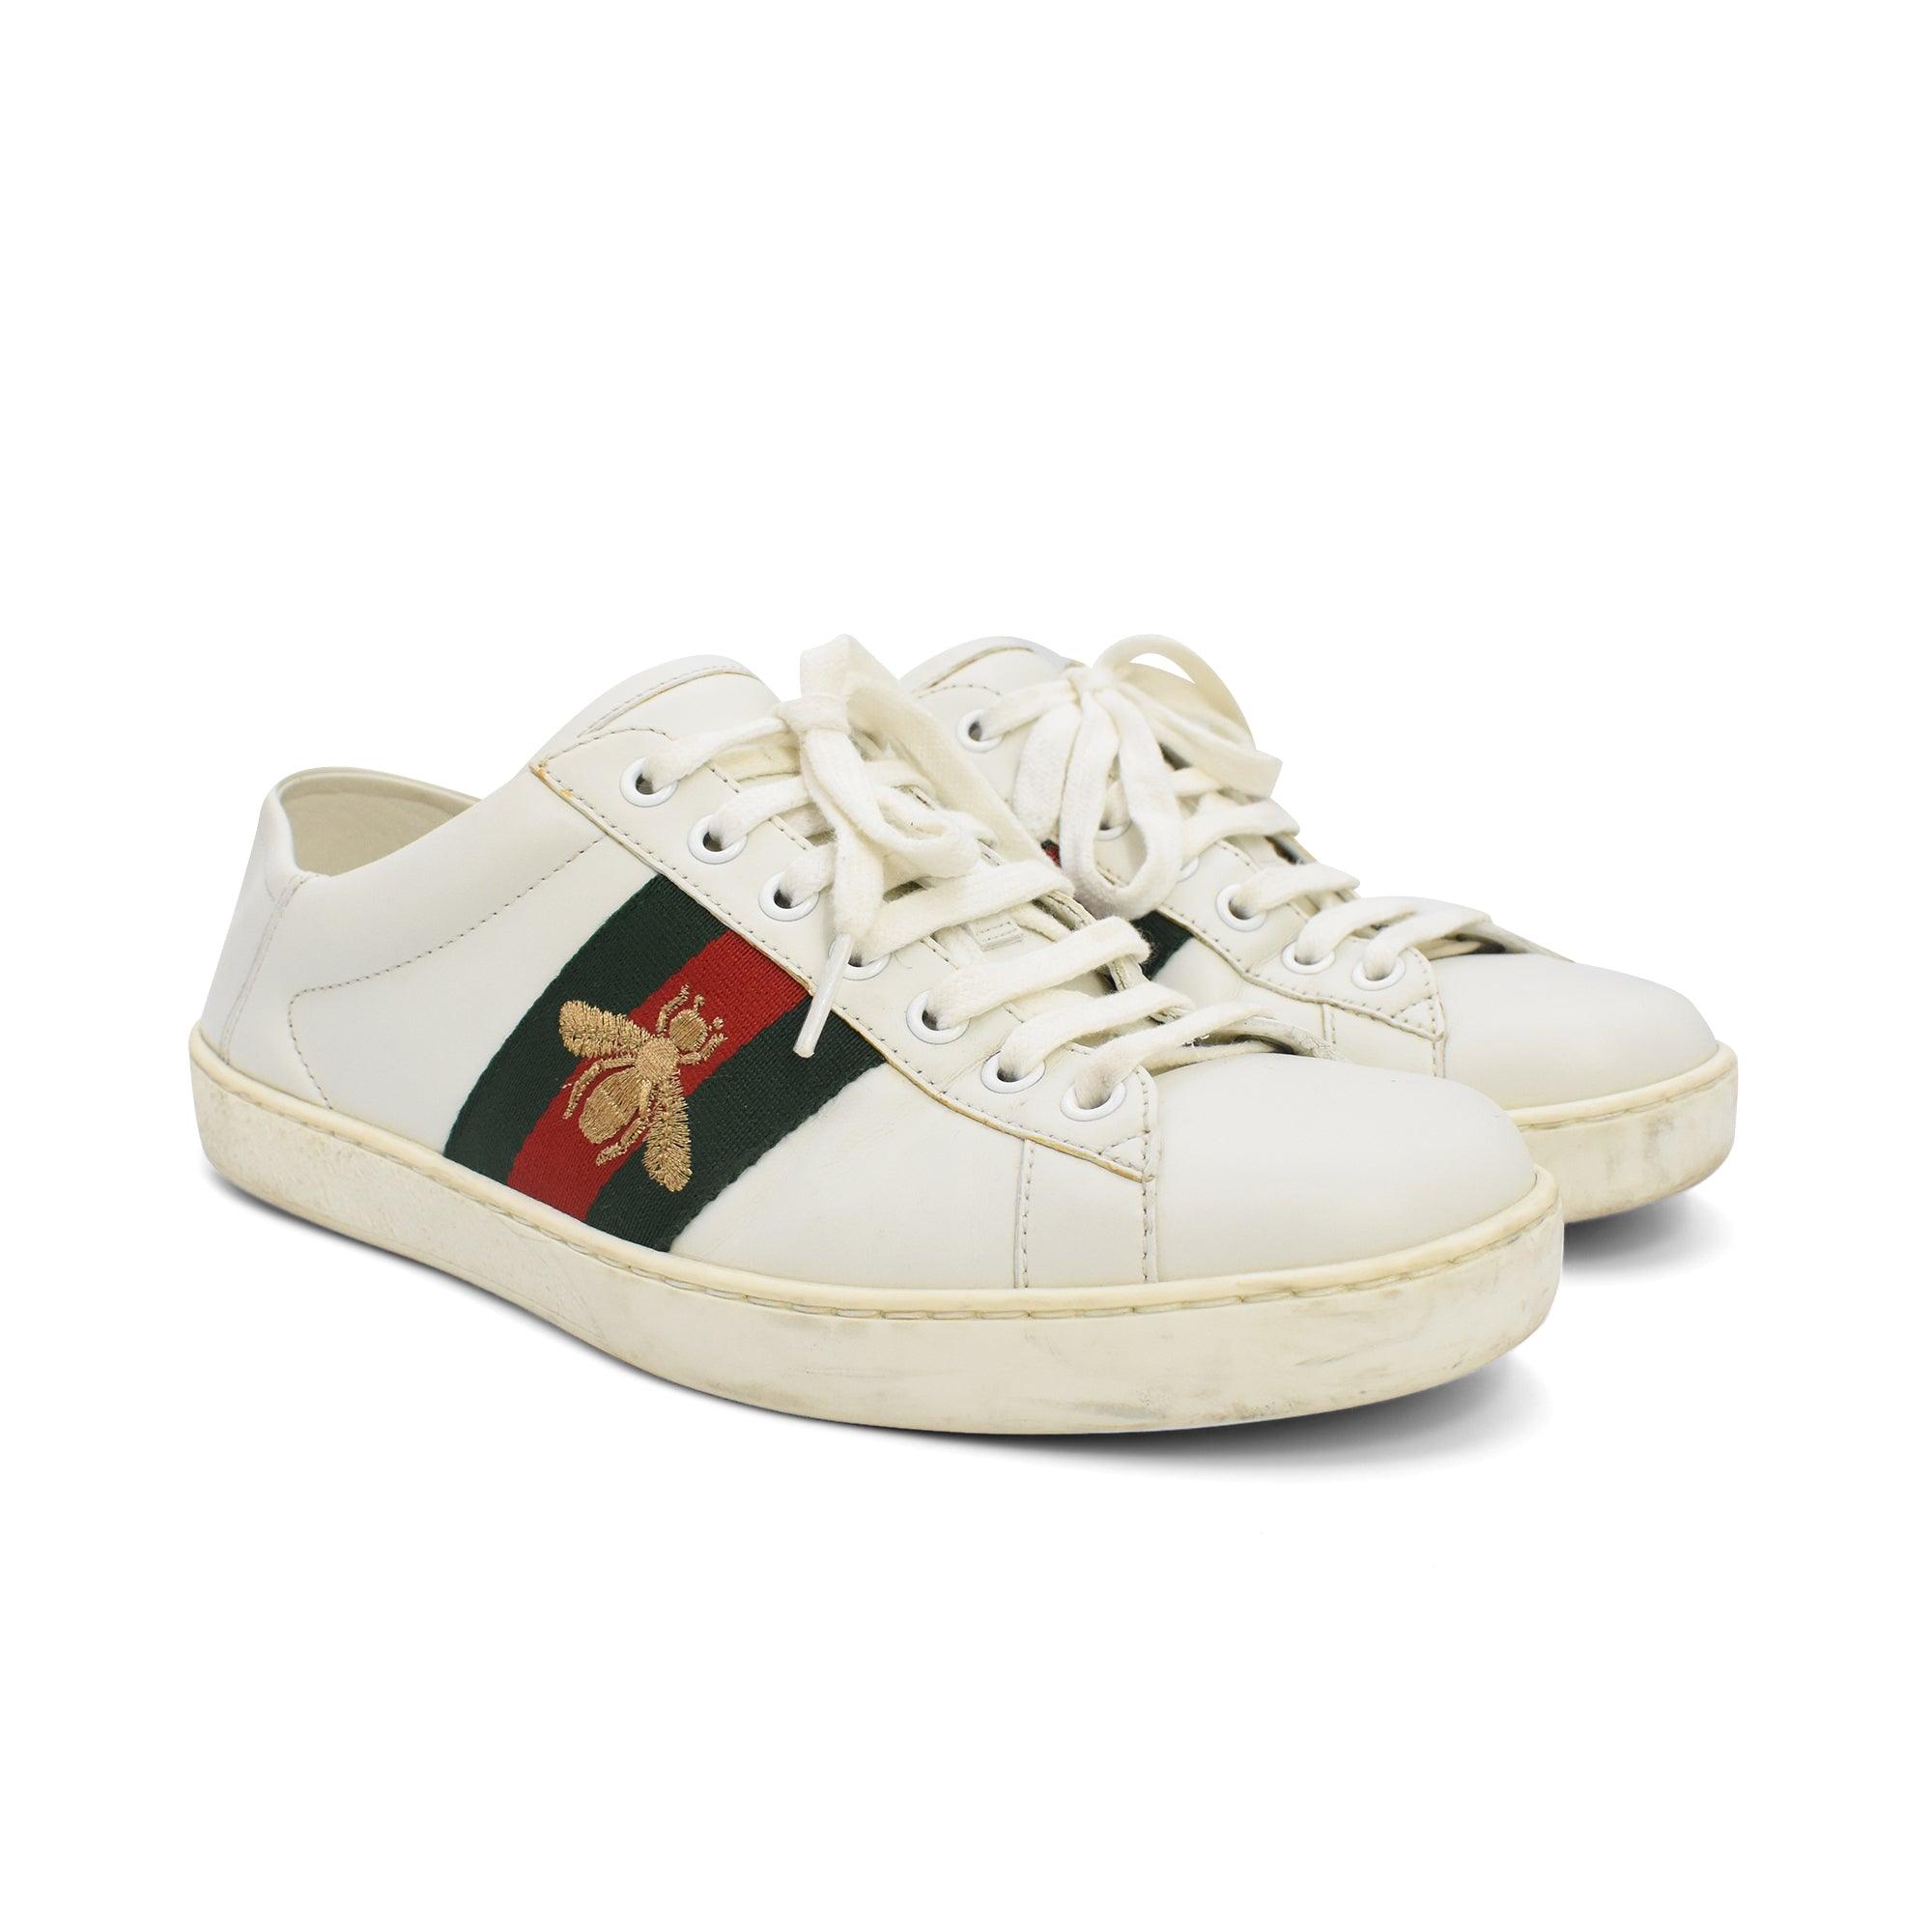 Gucci 'Ace' Sneakers - Men's 6 - Fashionably Yours